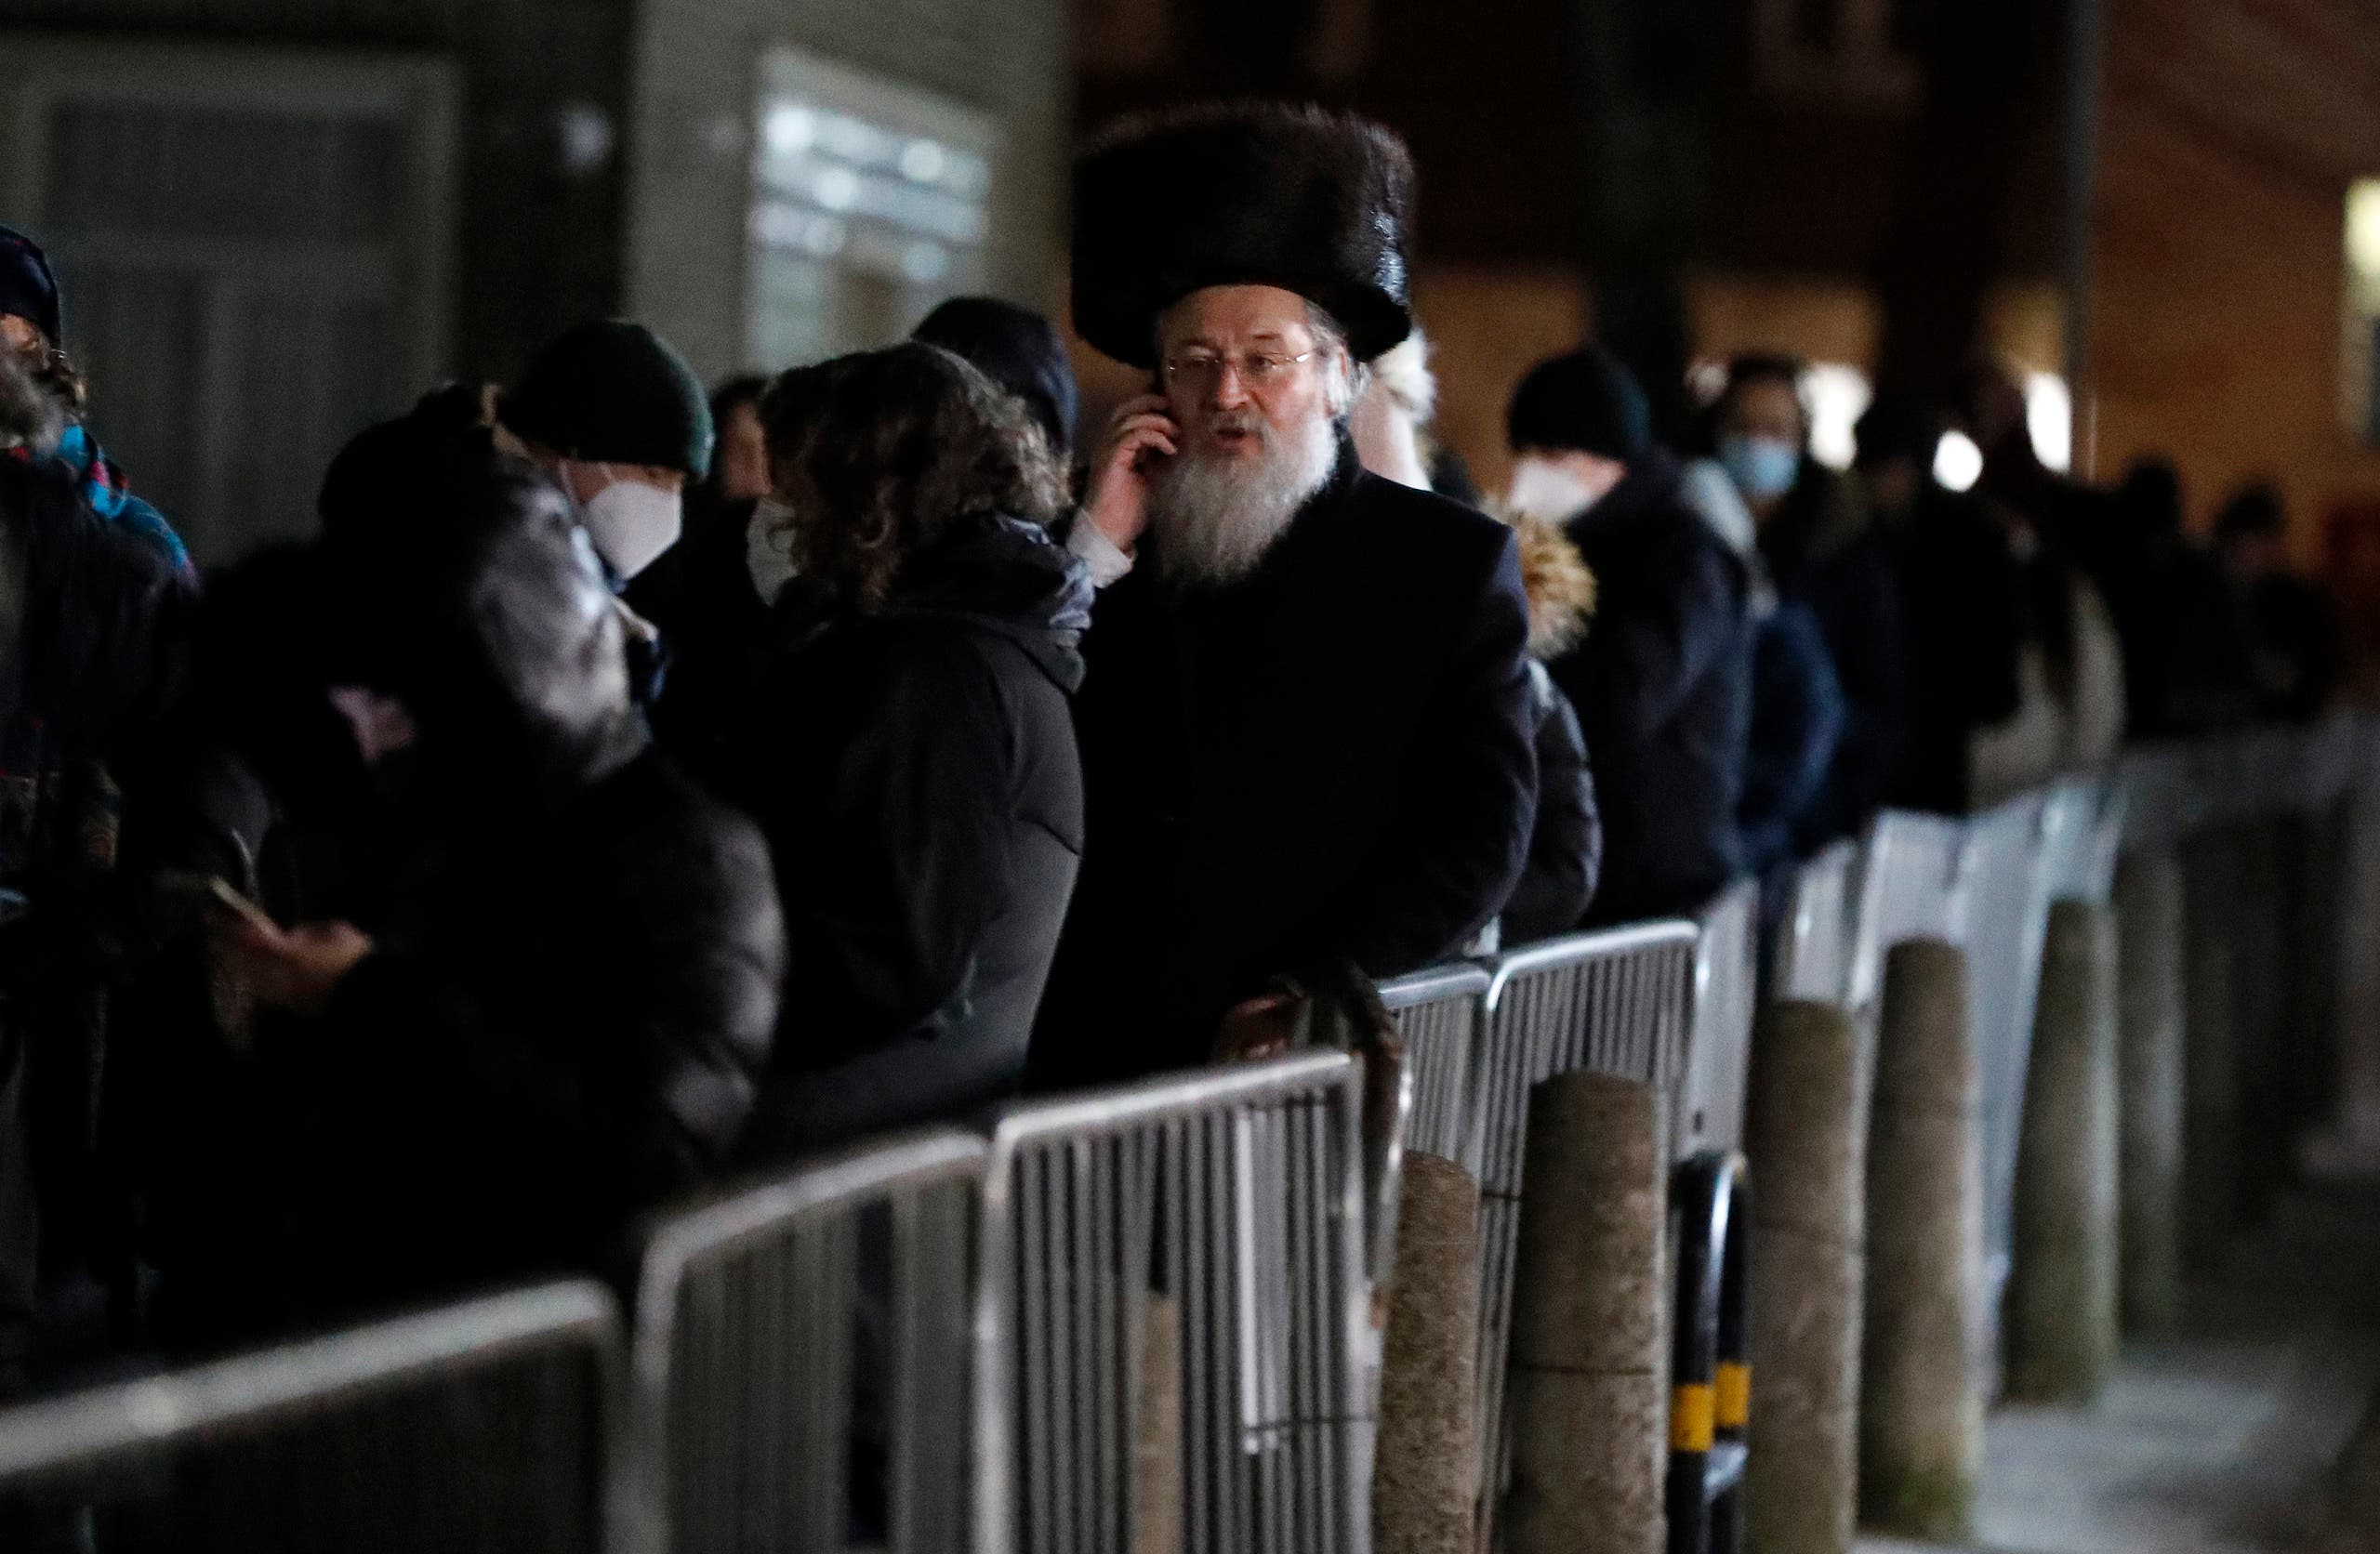  People from the Haredi Orthodox Jewish community arrive at an event to encourage vaccine uptake in the ultra-Orthodox community at the John Scott Vaccination Centre in London, Saturday, February 13, 2021. (AP)